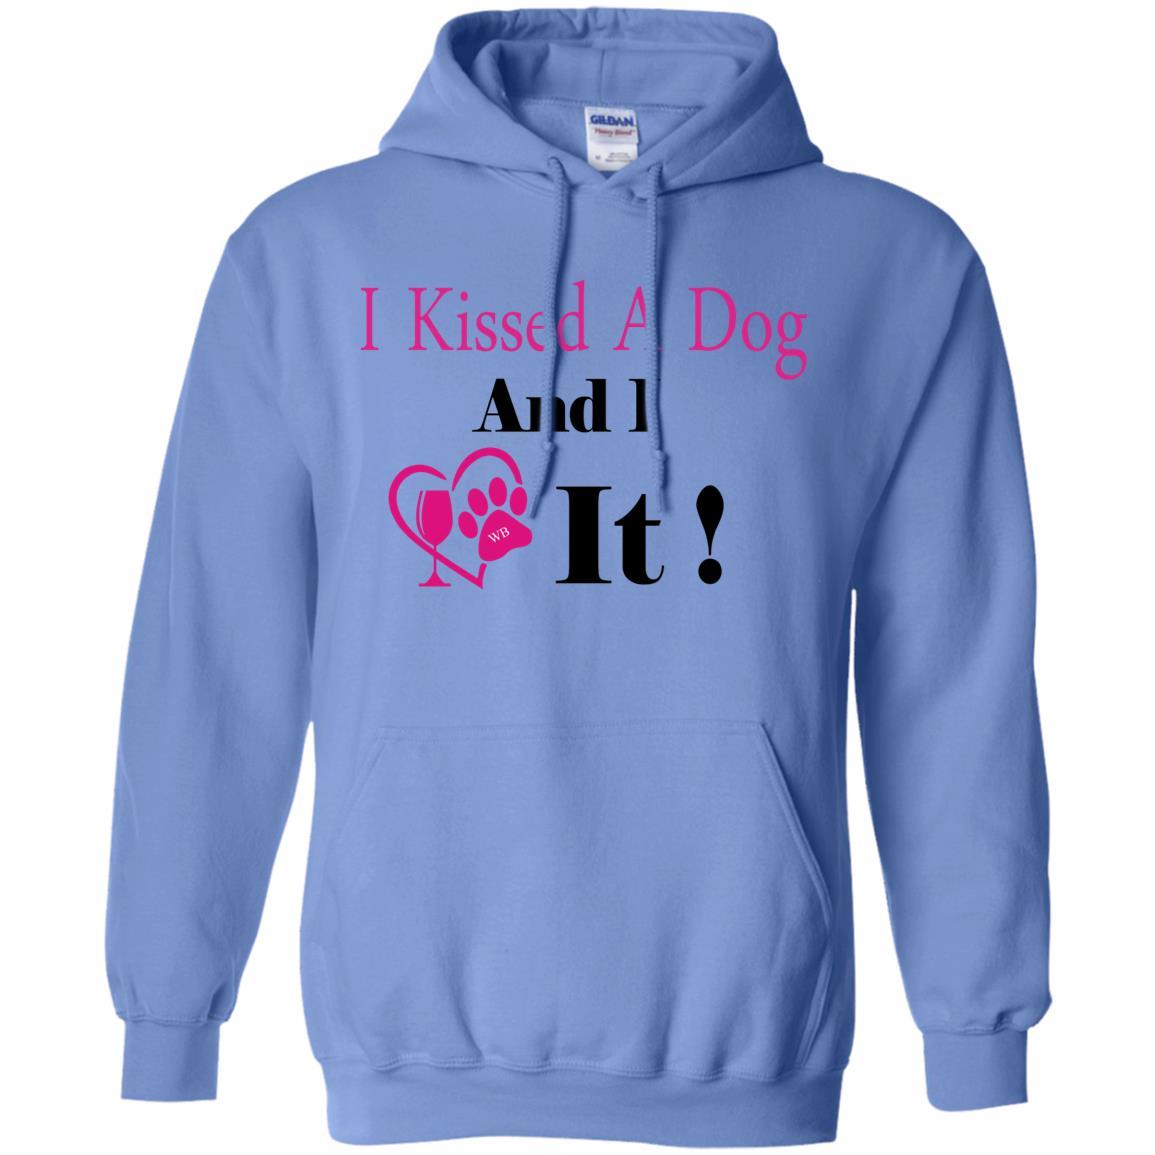 Sweatshirts Carolina Blue / S WineyBitches.co "I Kissed A Dog And I Loved It:"  Pullover Unisex Hoodie 8 oz. WineyBitchesCo